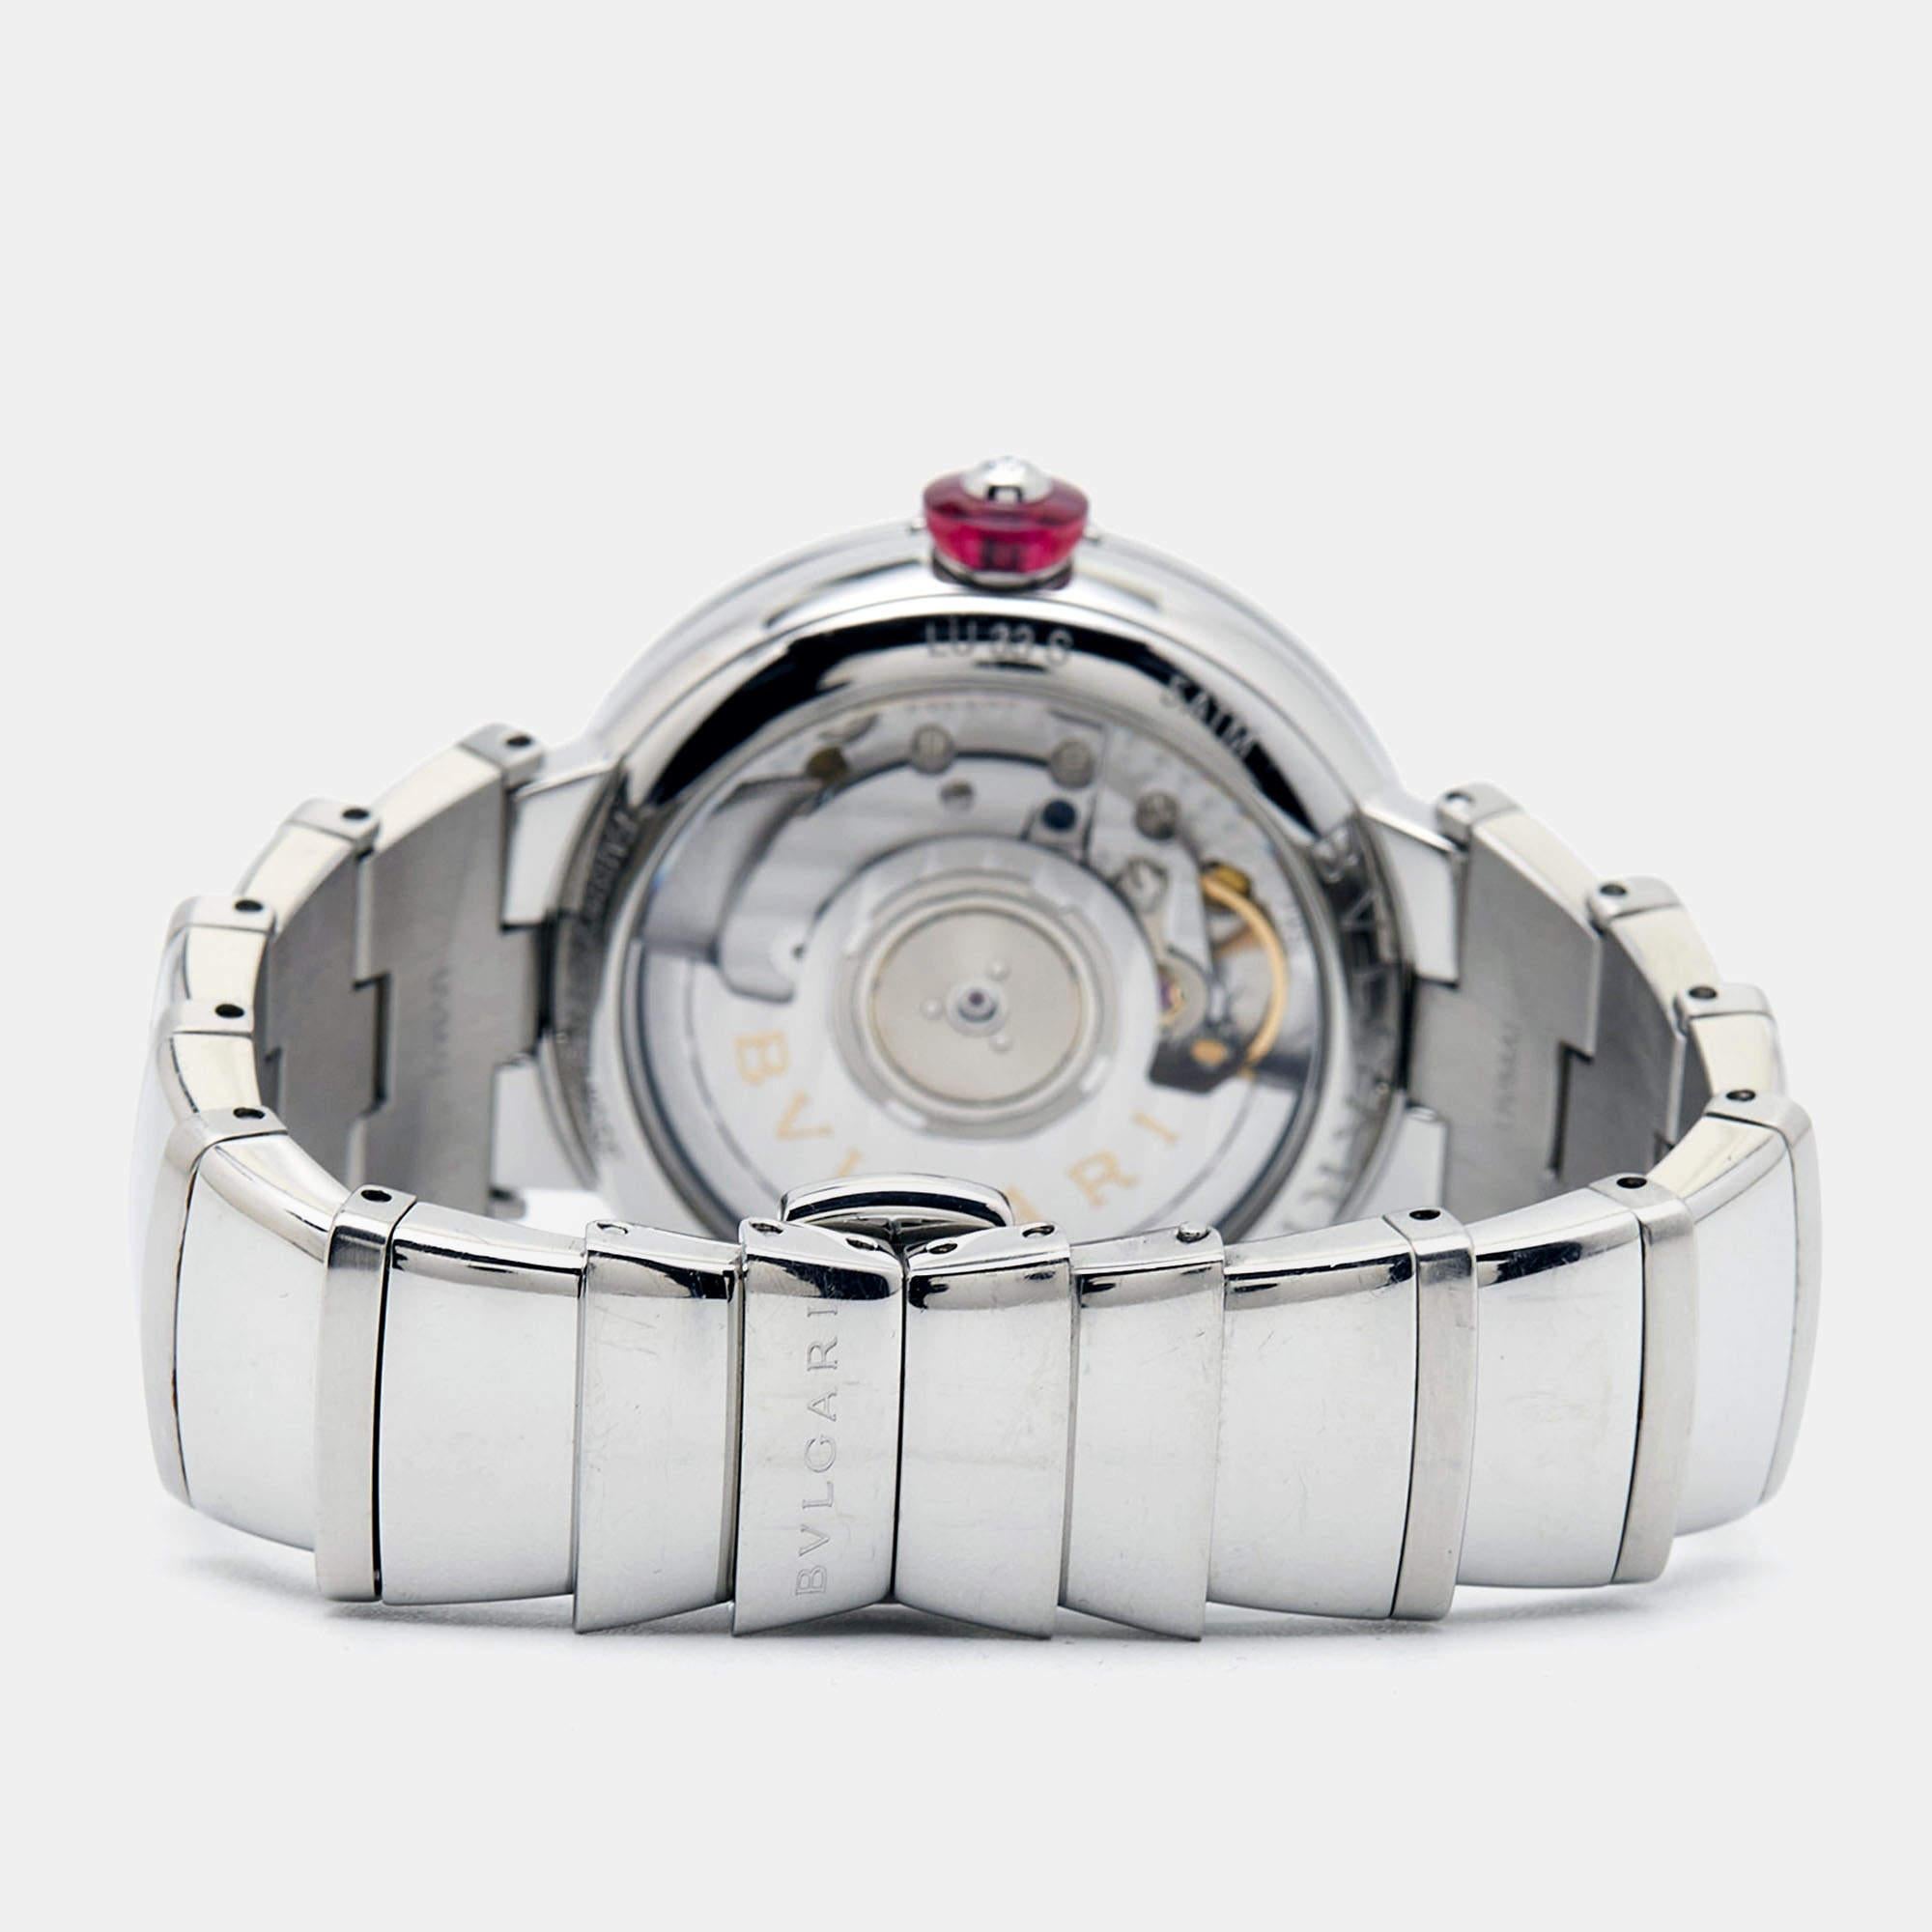 Bvlgari's collection of watches is suited for everyday life and for the special days when you need to dress up, thus making the brand's creations versatile and worth the money you spend. Find the Bvlgari charm with this luxurious automatic Lvcea